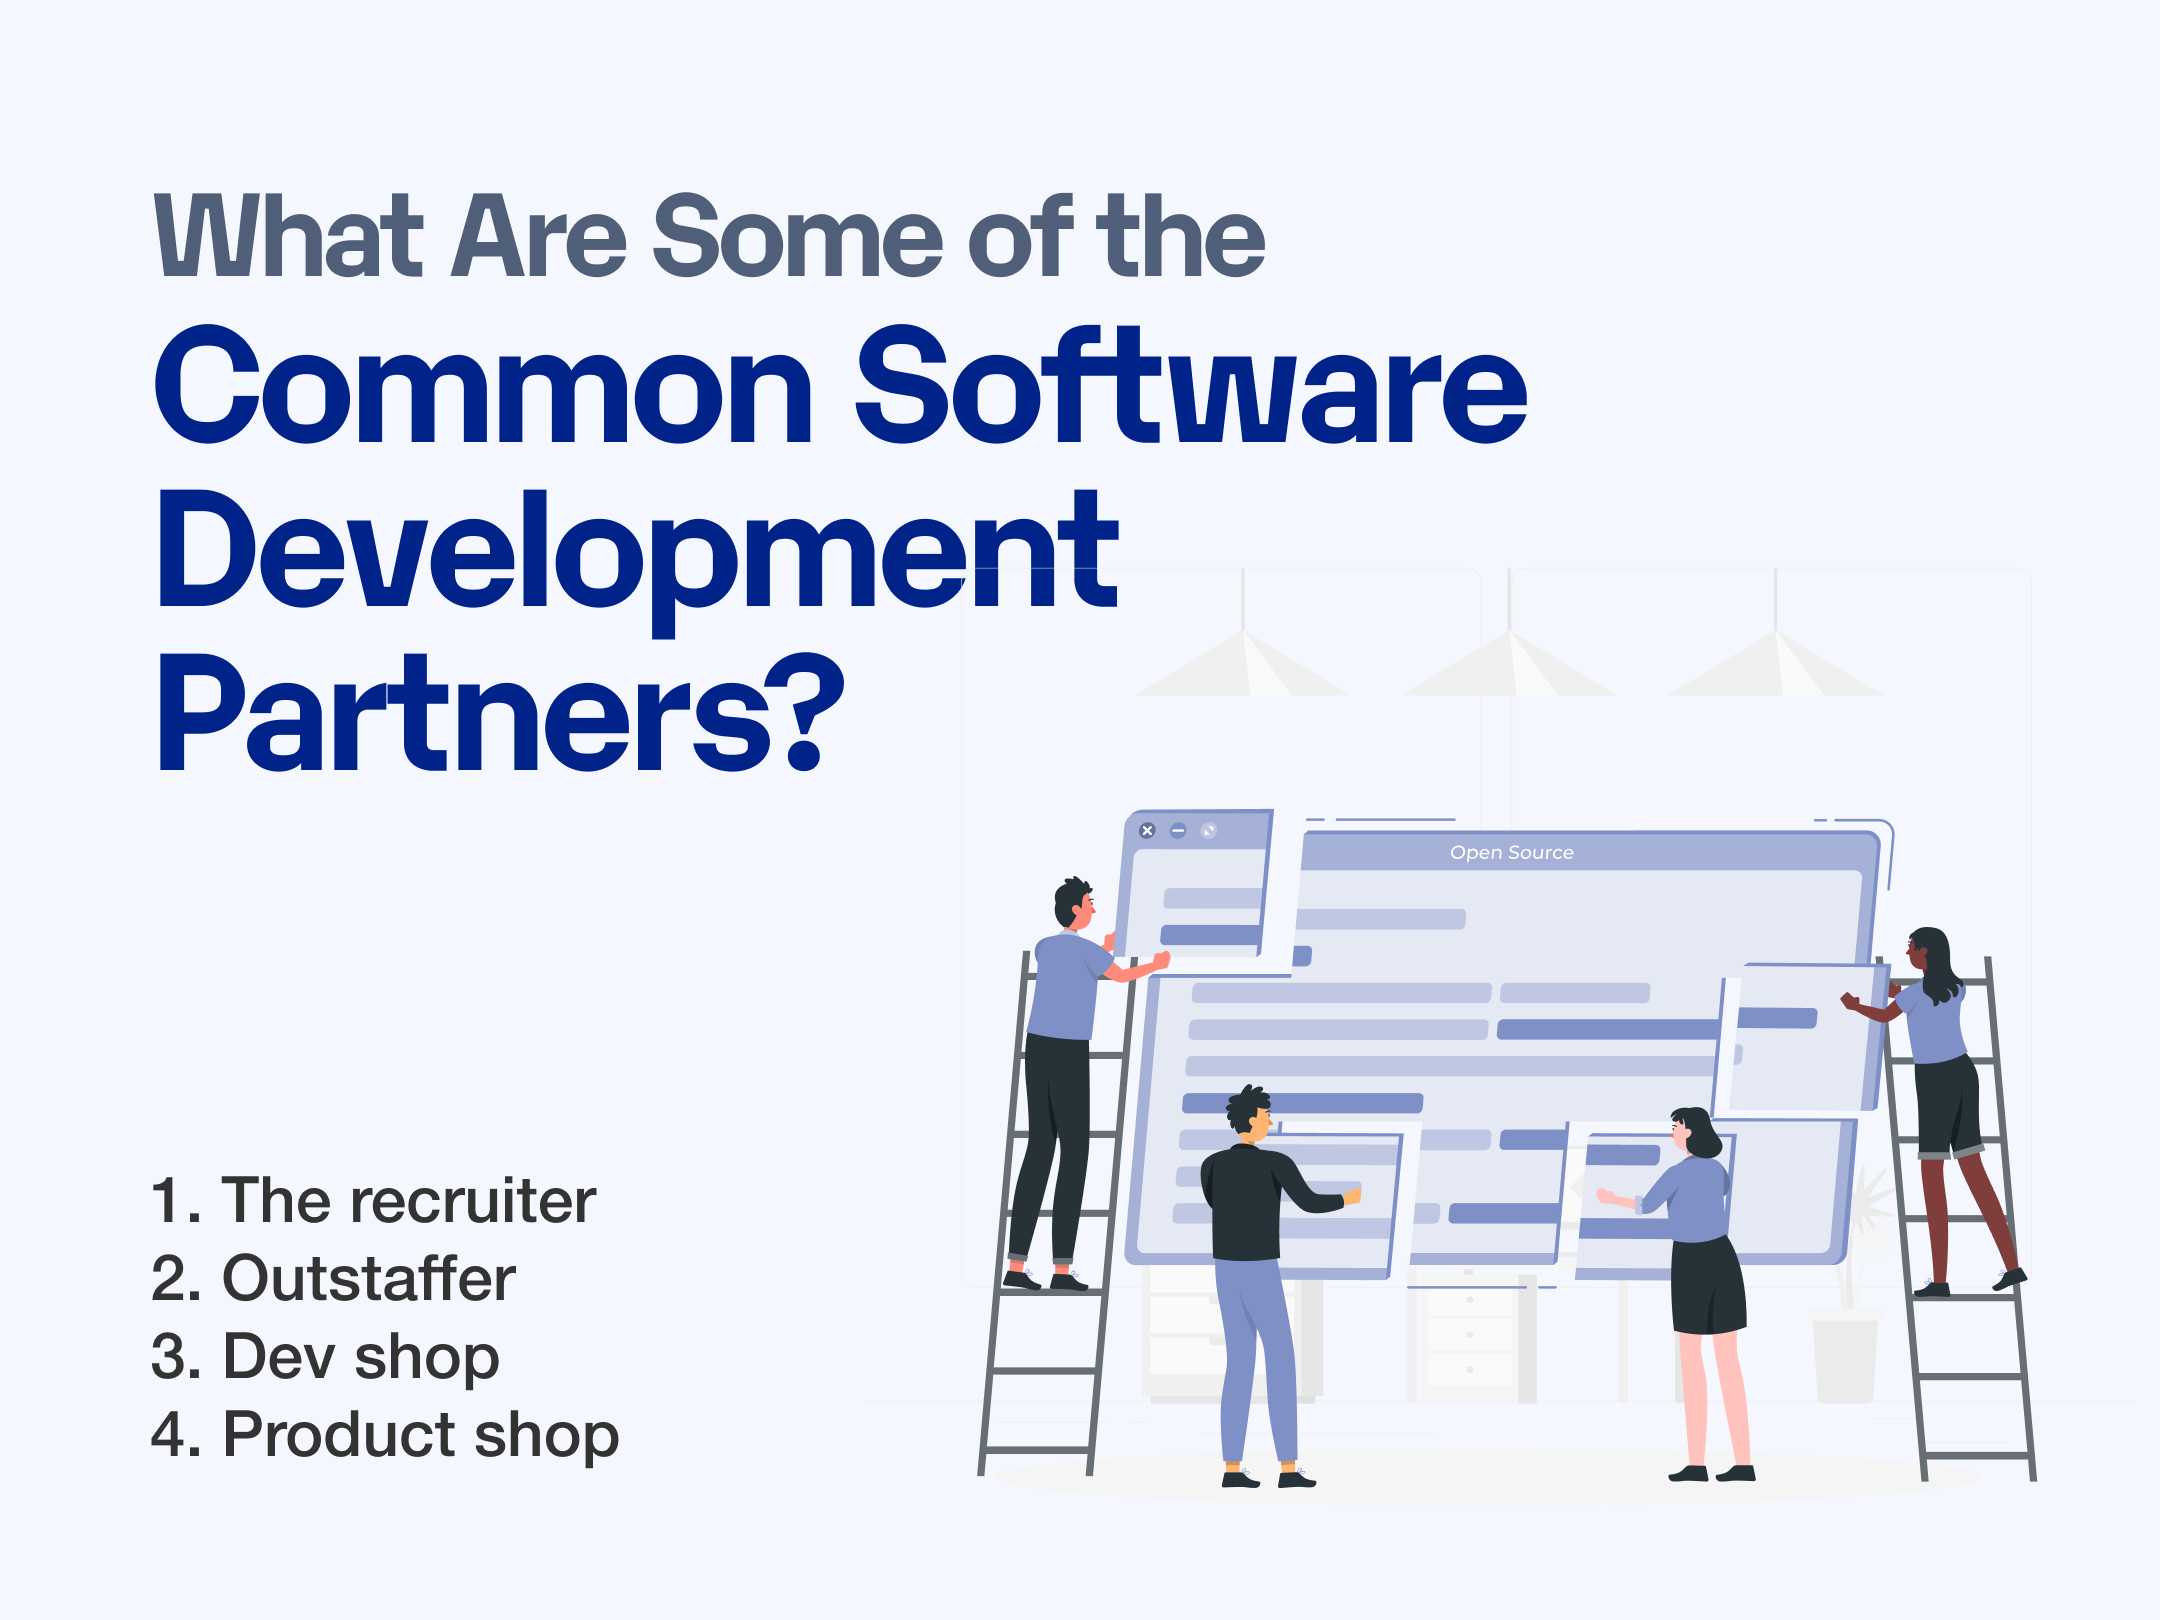 What are some of the common software development partners?